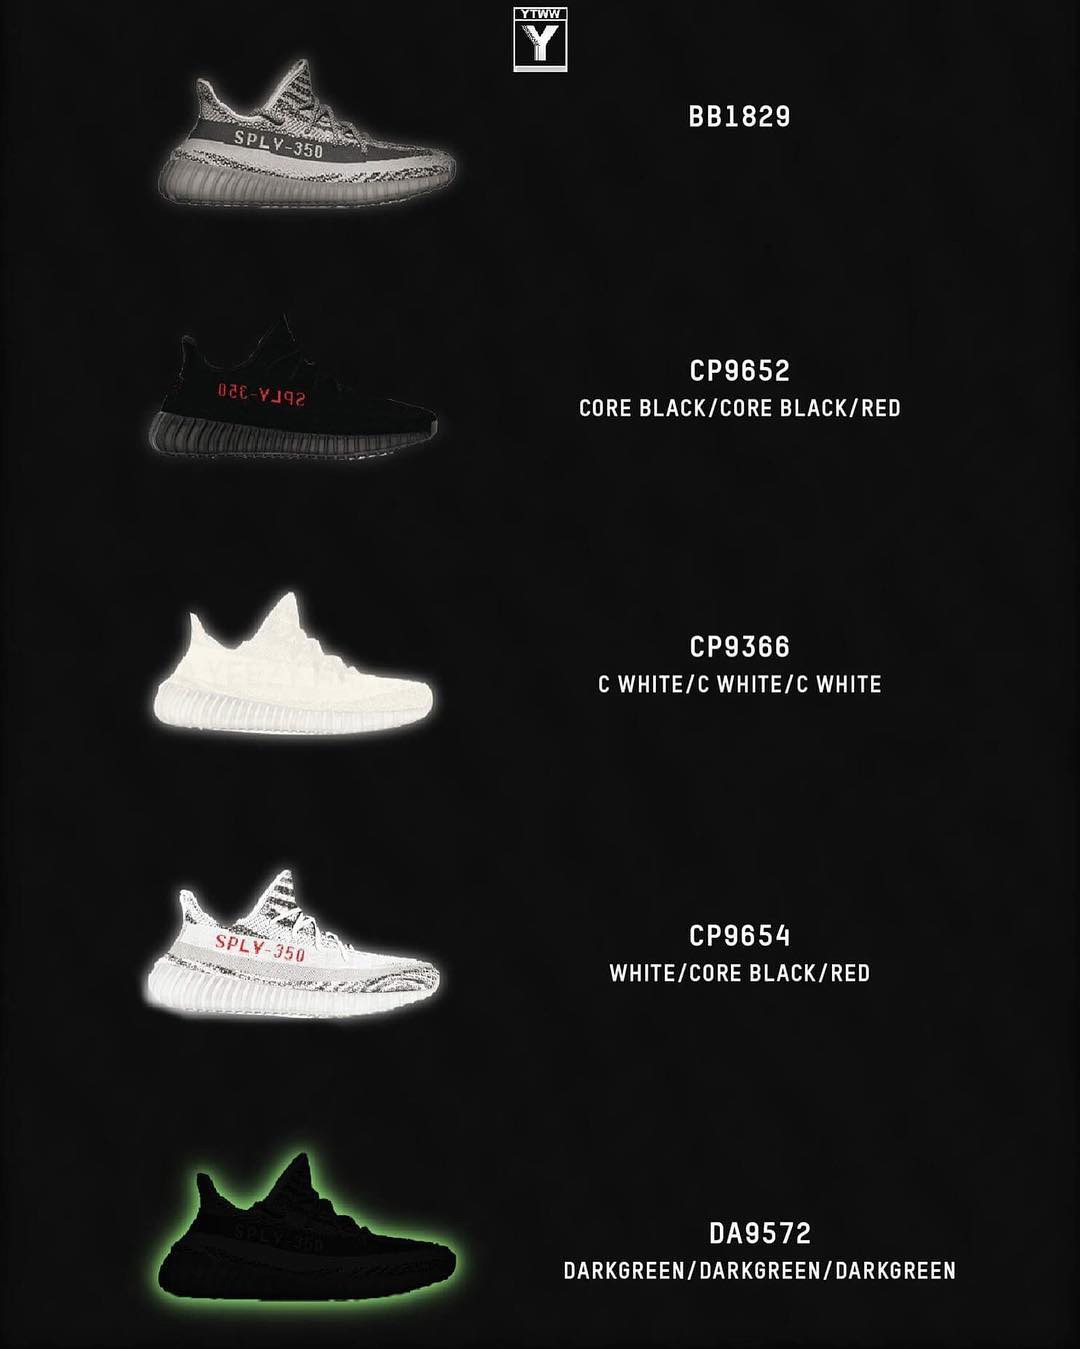 Adidas Collection Yeezy boost 350 v2 solar red 